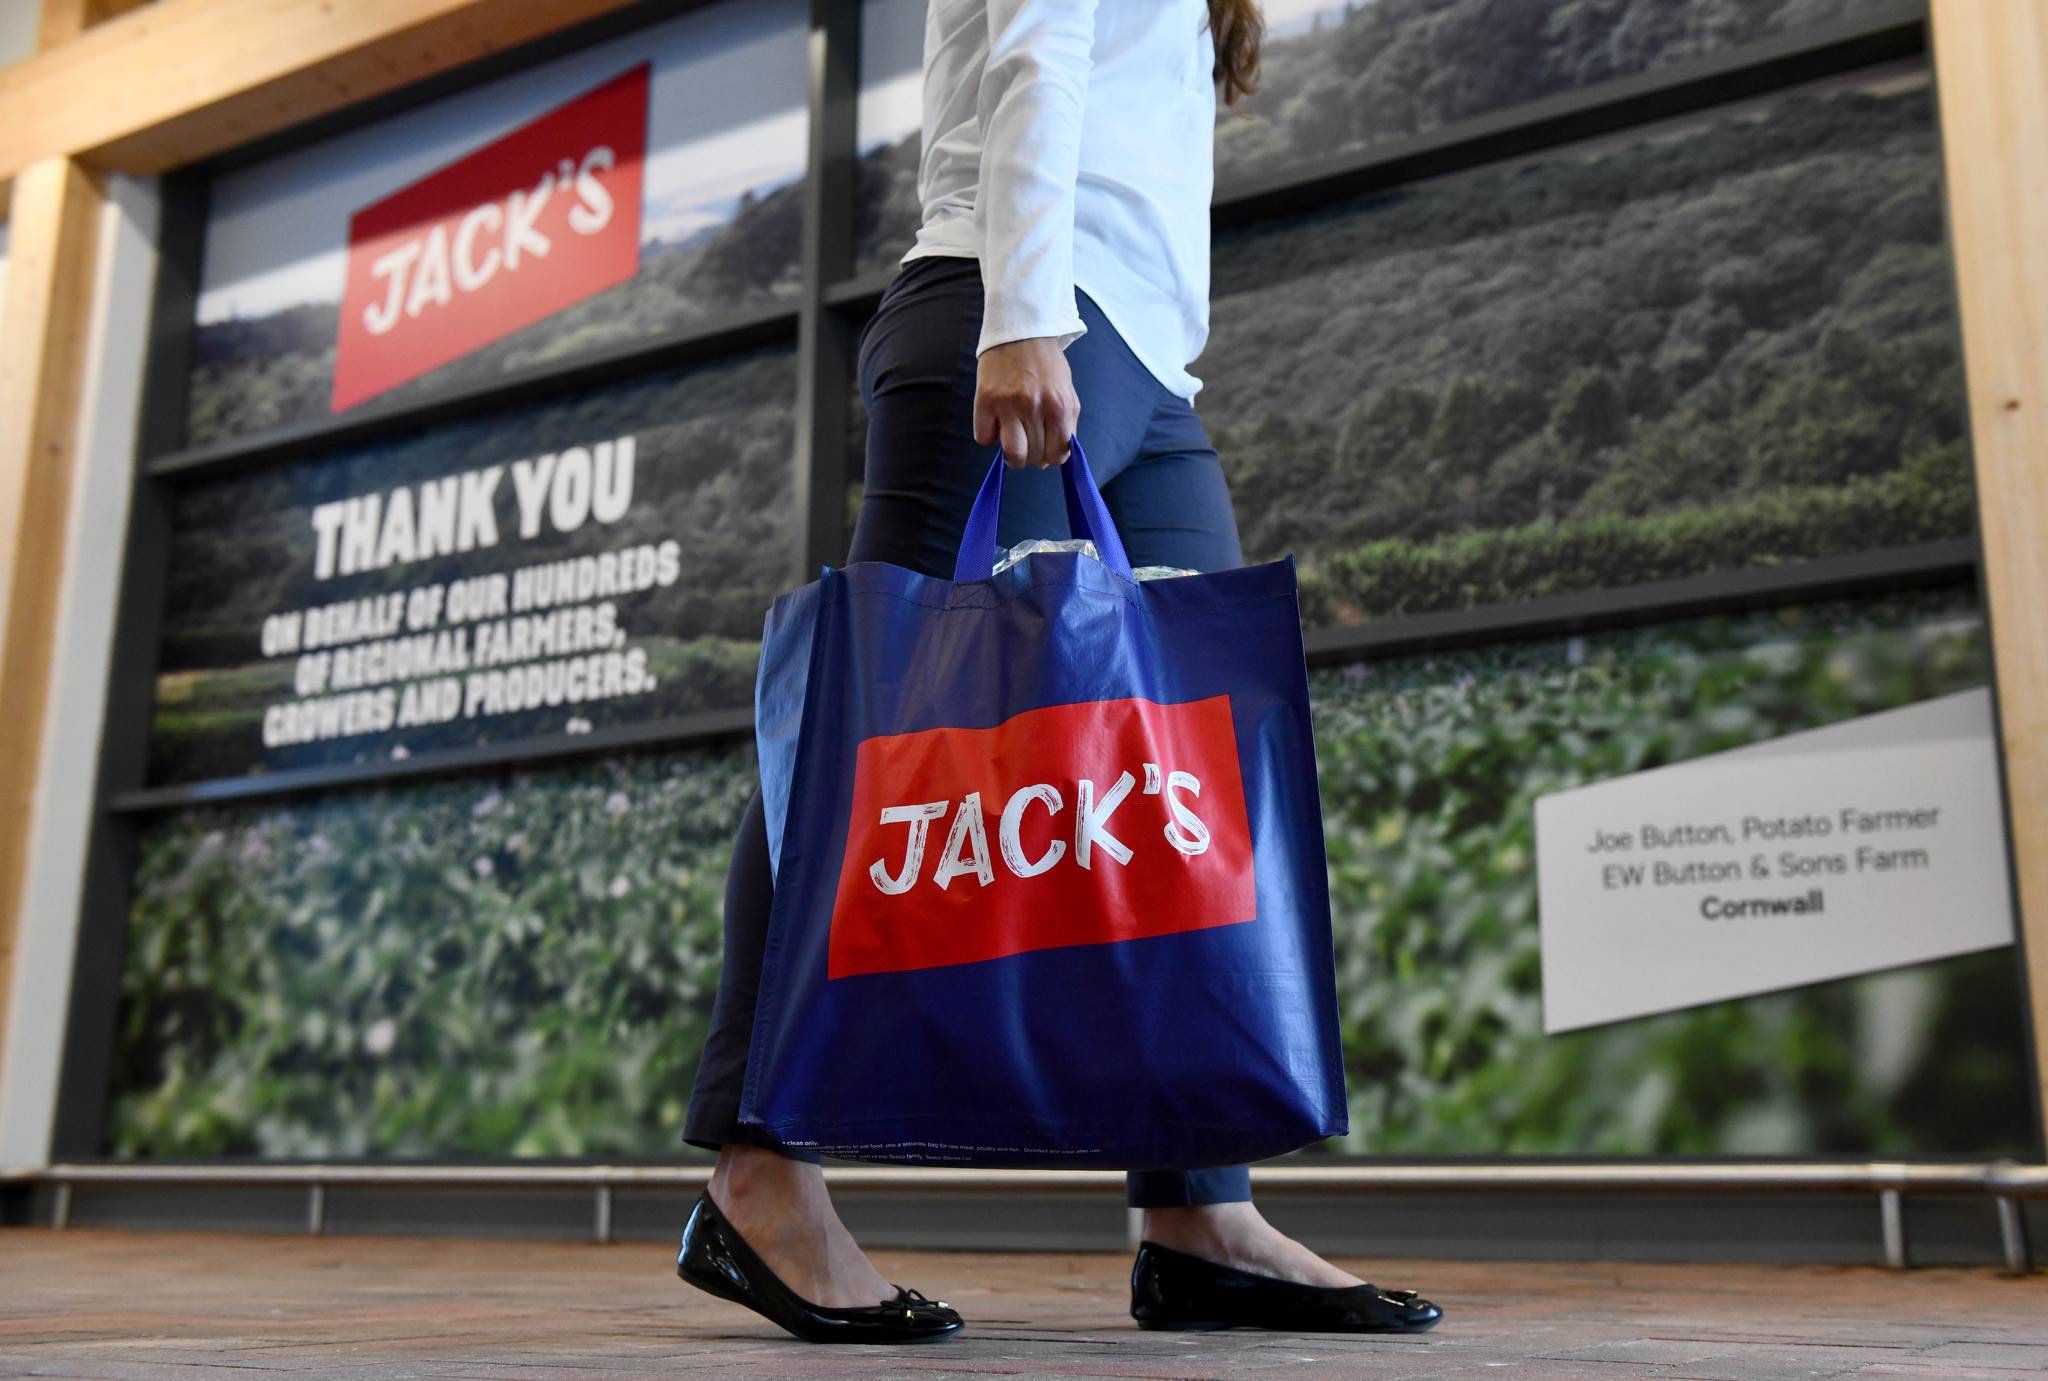 Tesco’s discounted Jack’s offers Britons real bargains